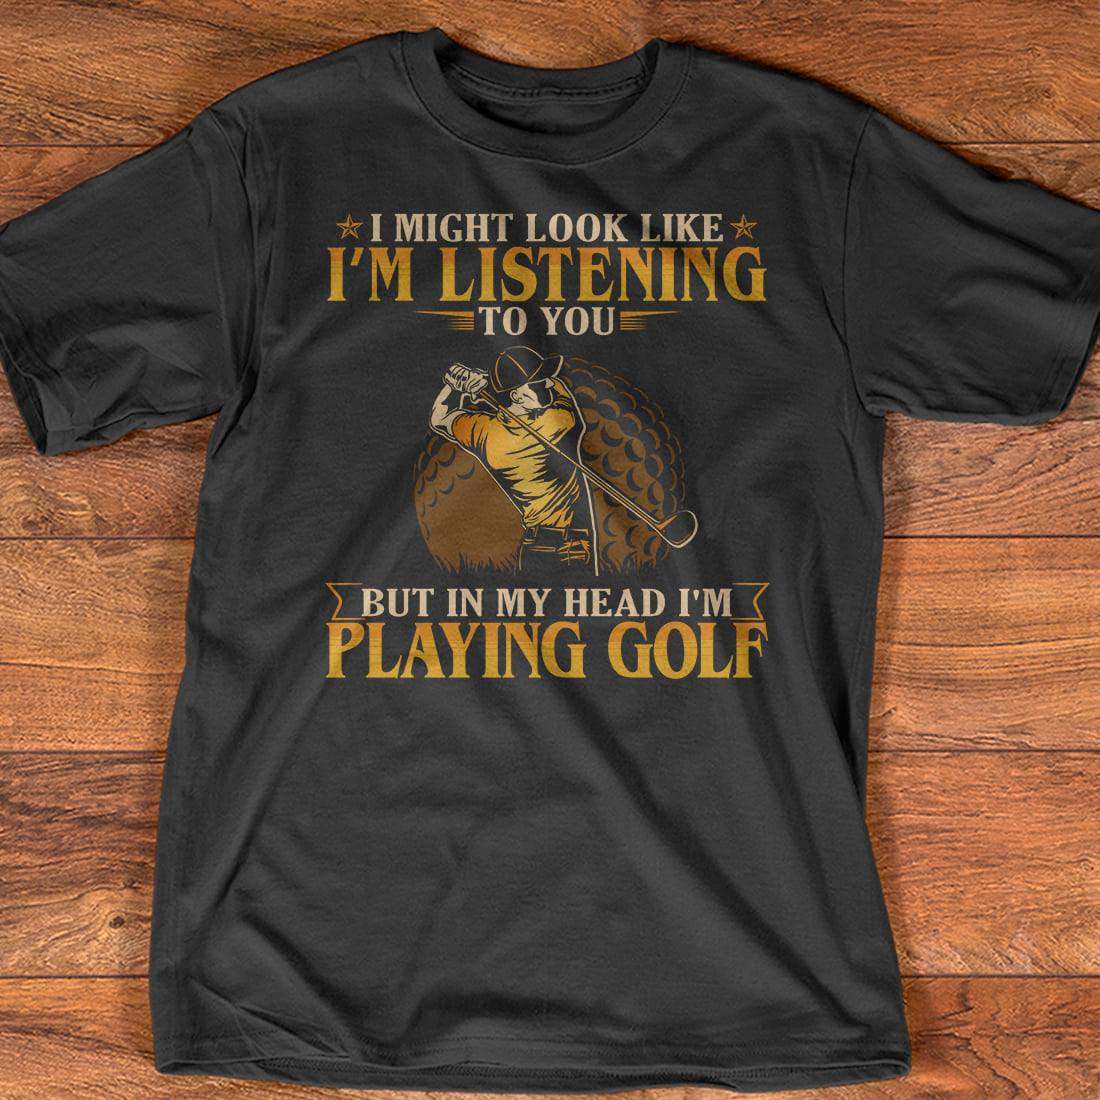 I might look like I'm listening to you but in my head I'm playing golf